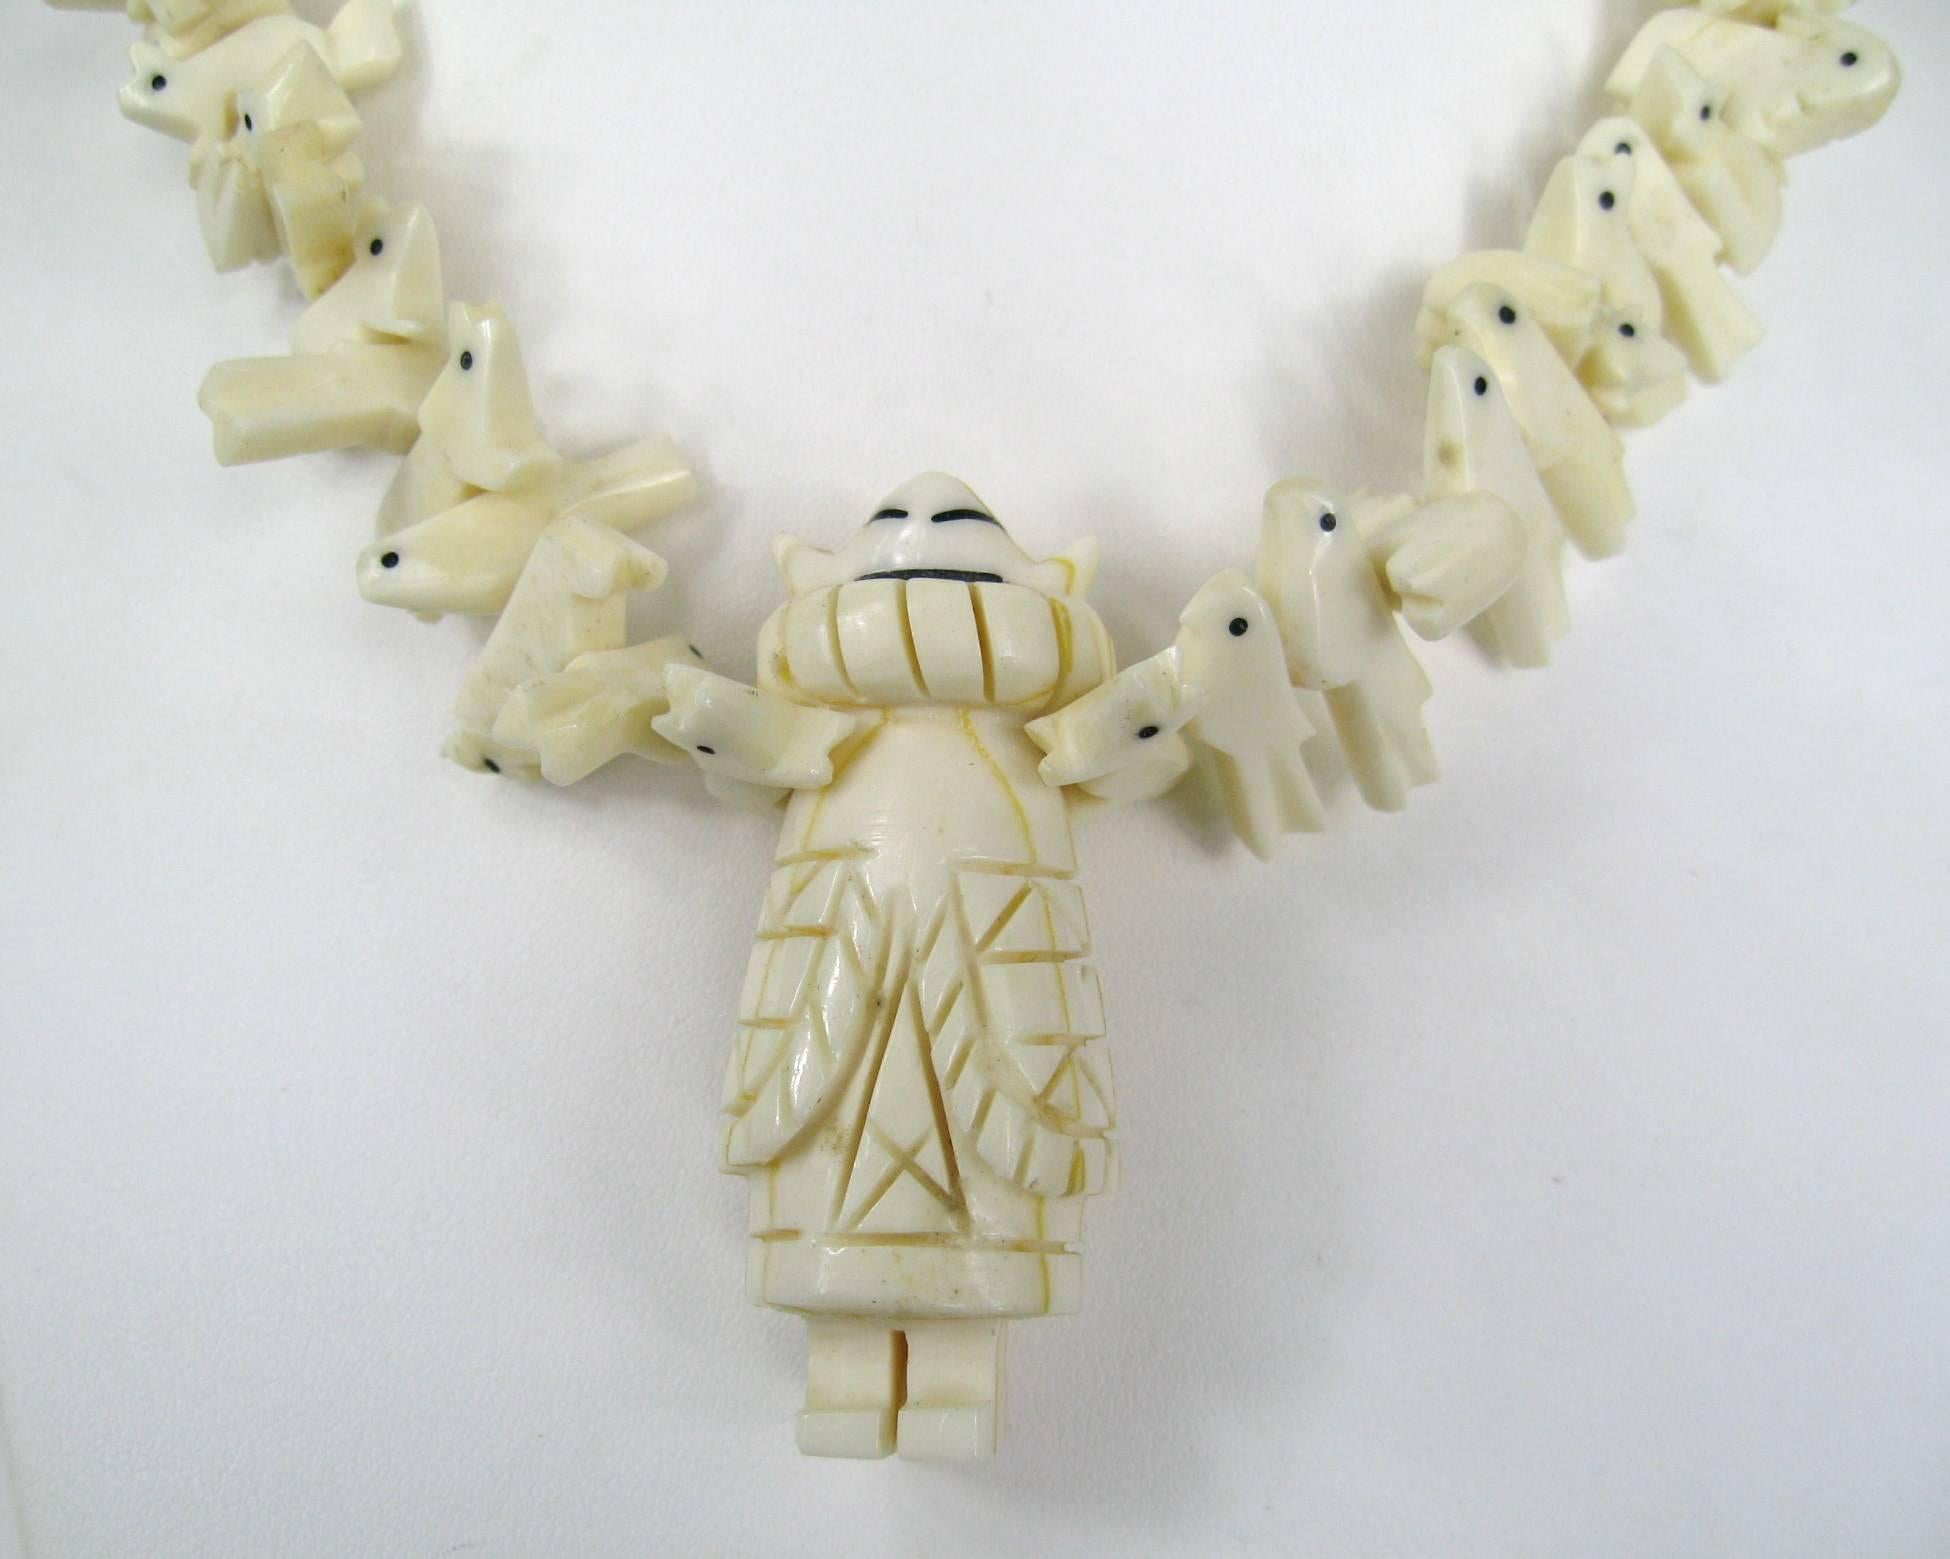 Stunning  Animal Fetish Native American necklace. 64 Animals on this Fantastic necklace. A squaw wrap is where the ends of a necklace are permanently wrapped together so the necklace is slipped over the head to take it on and off. Center Kachina